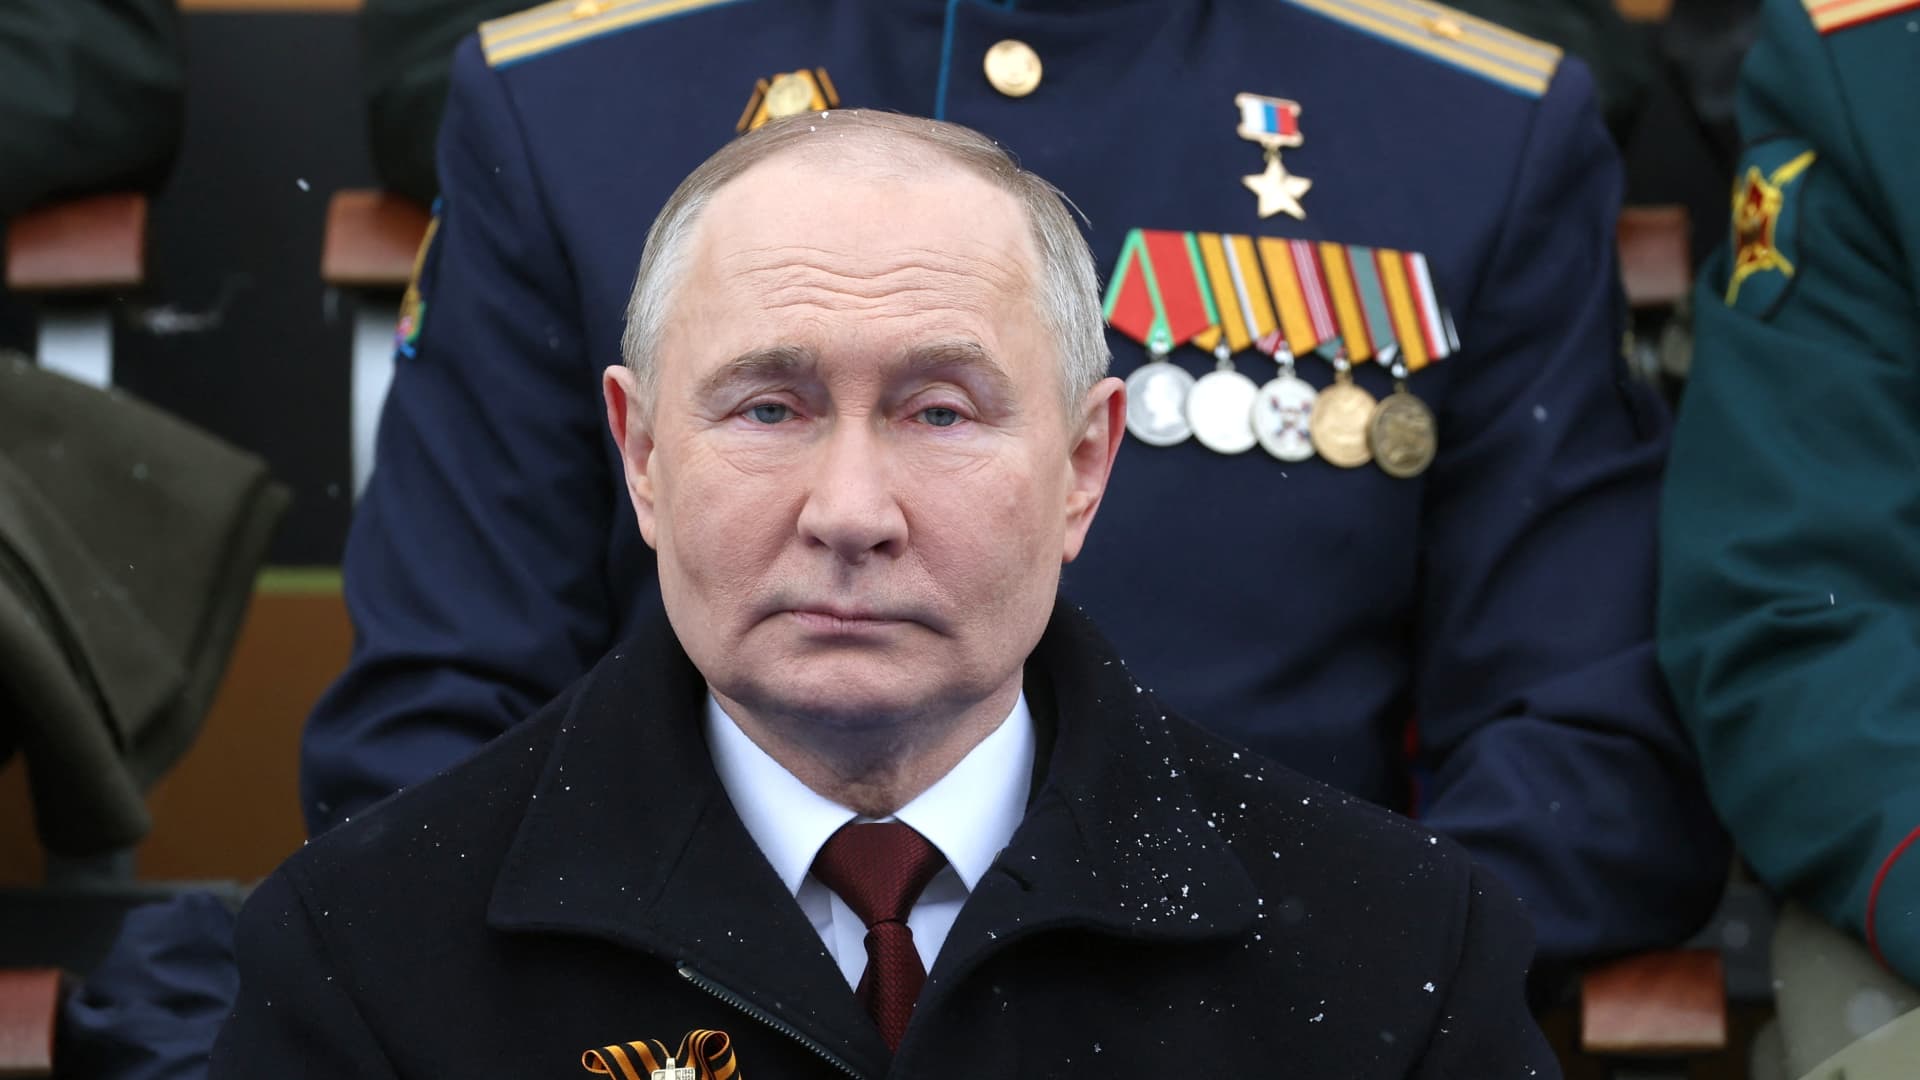 Putin replaces Russia’s defense minister with civilian economist in unforeseen transfer